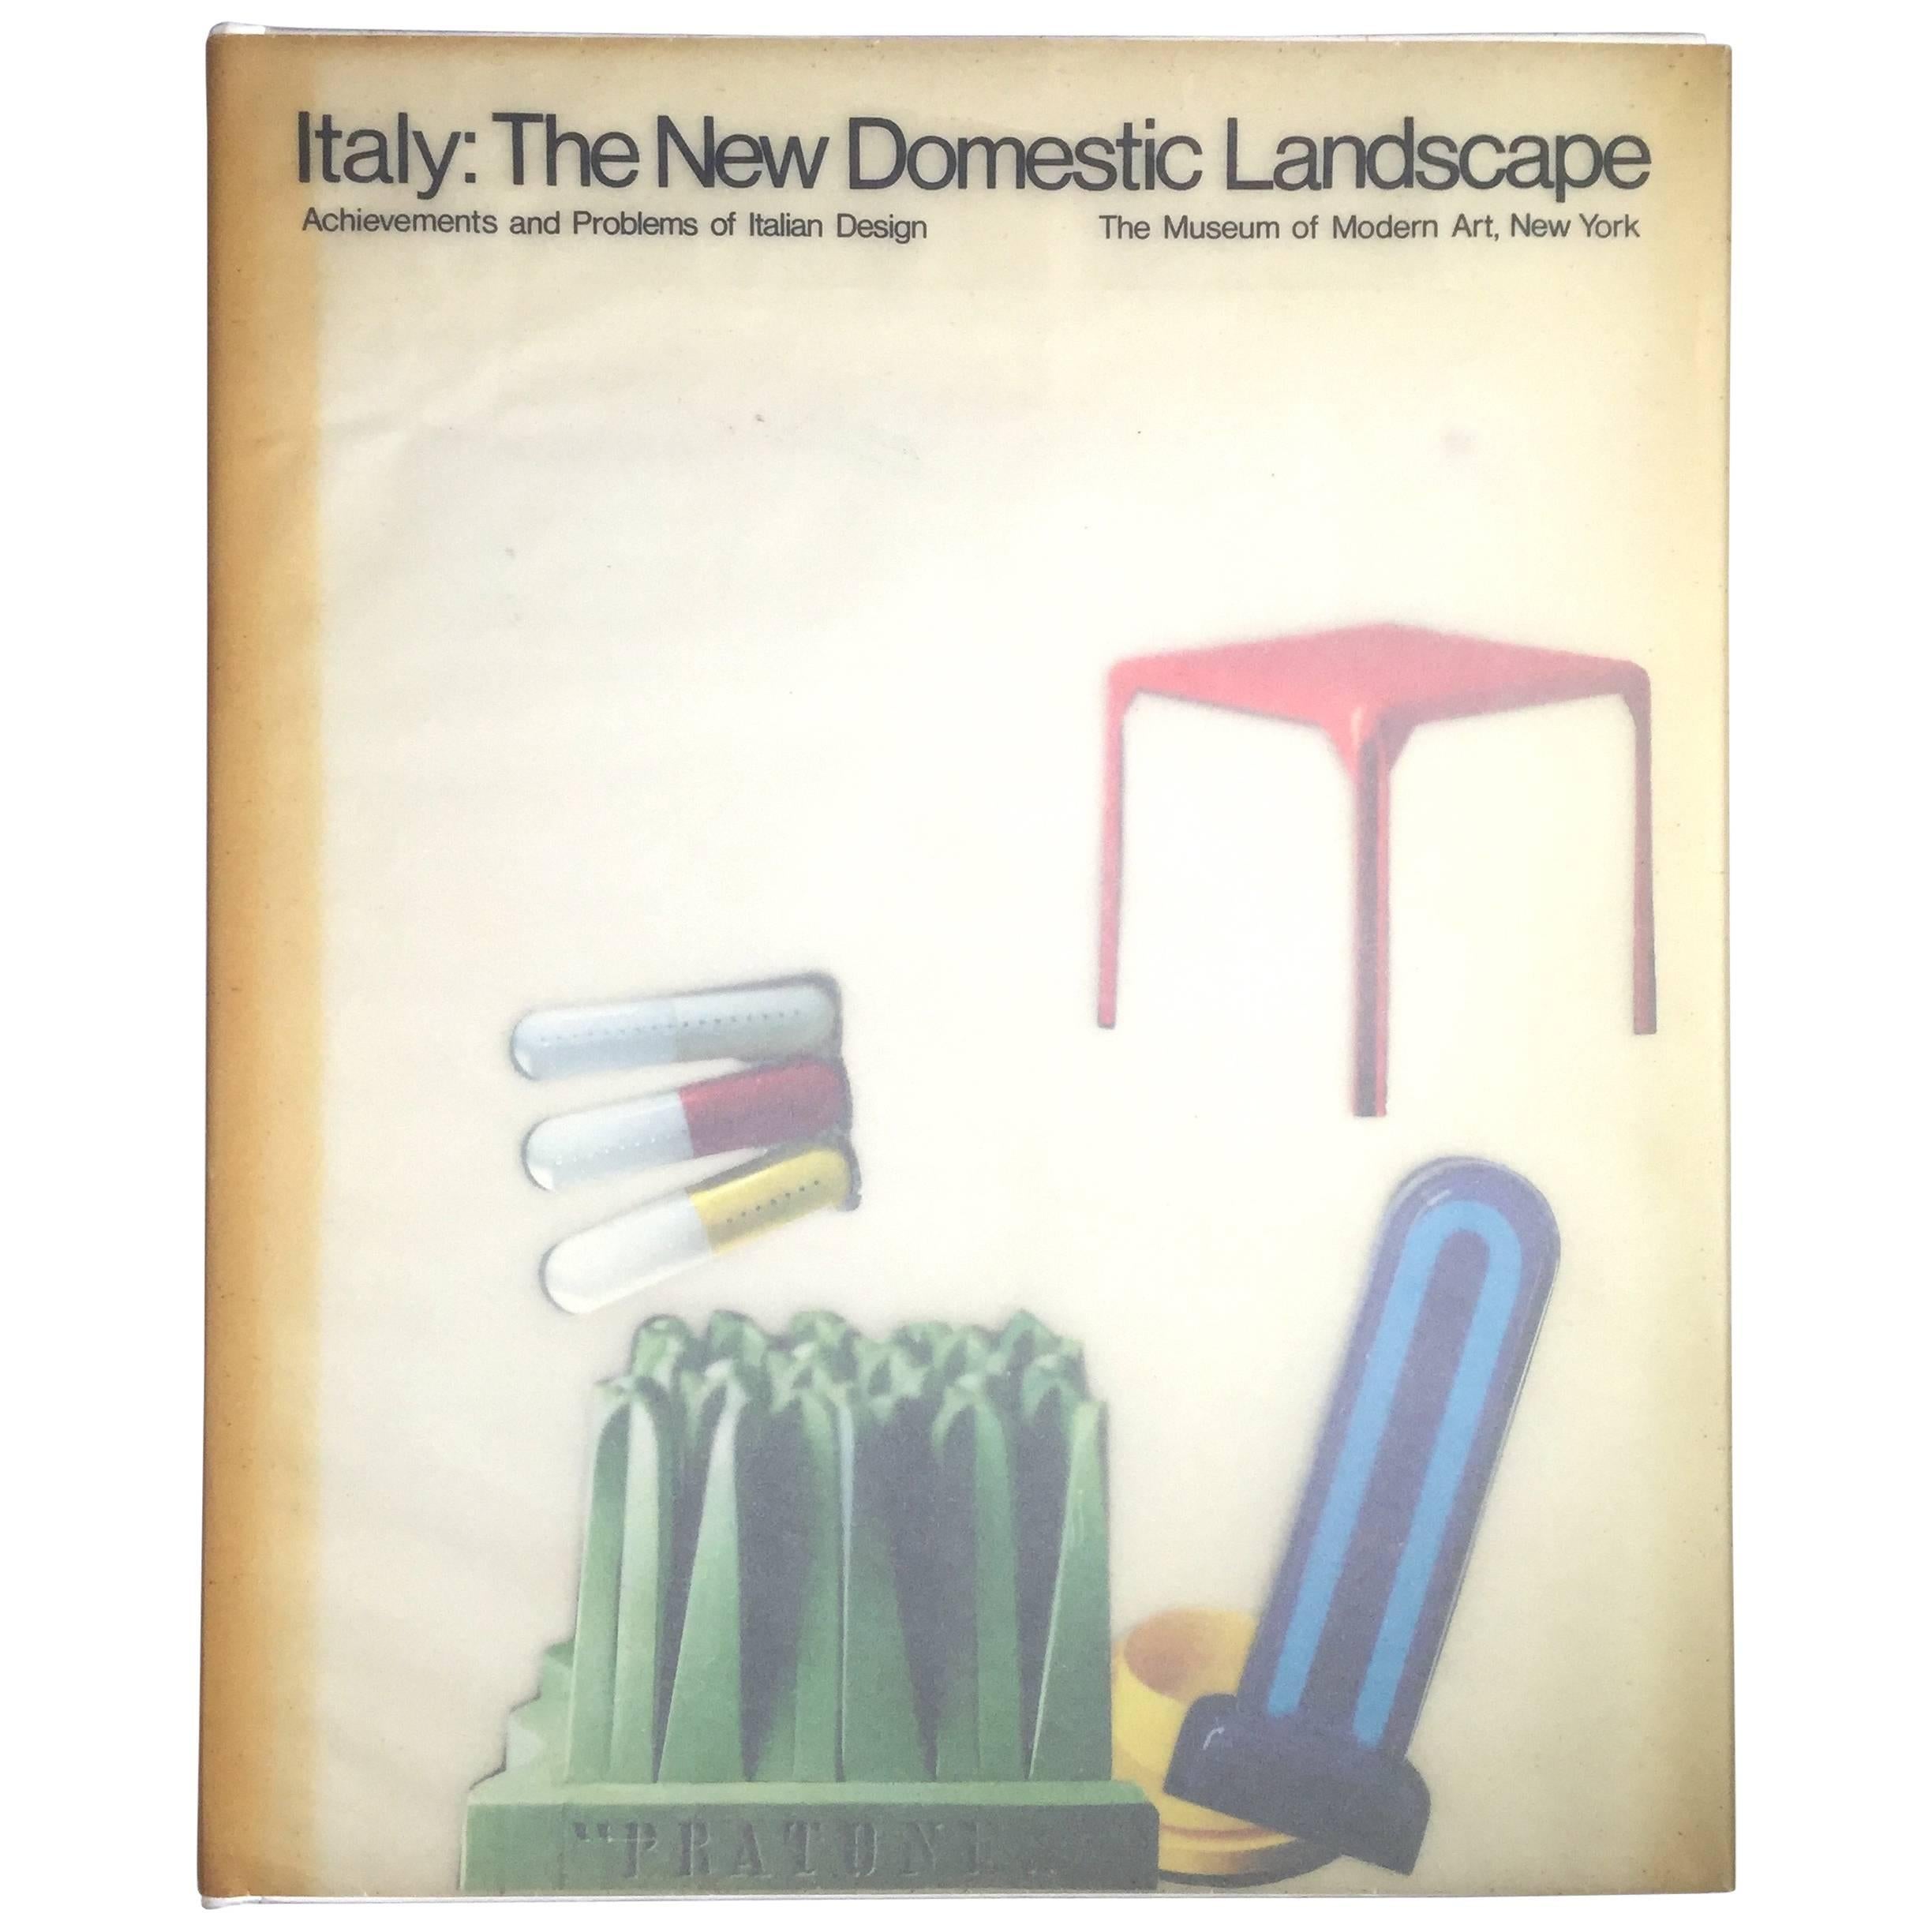 Italy: The New Domestic Landscape, Achievements and Problems of Italian Design